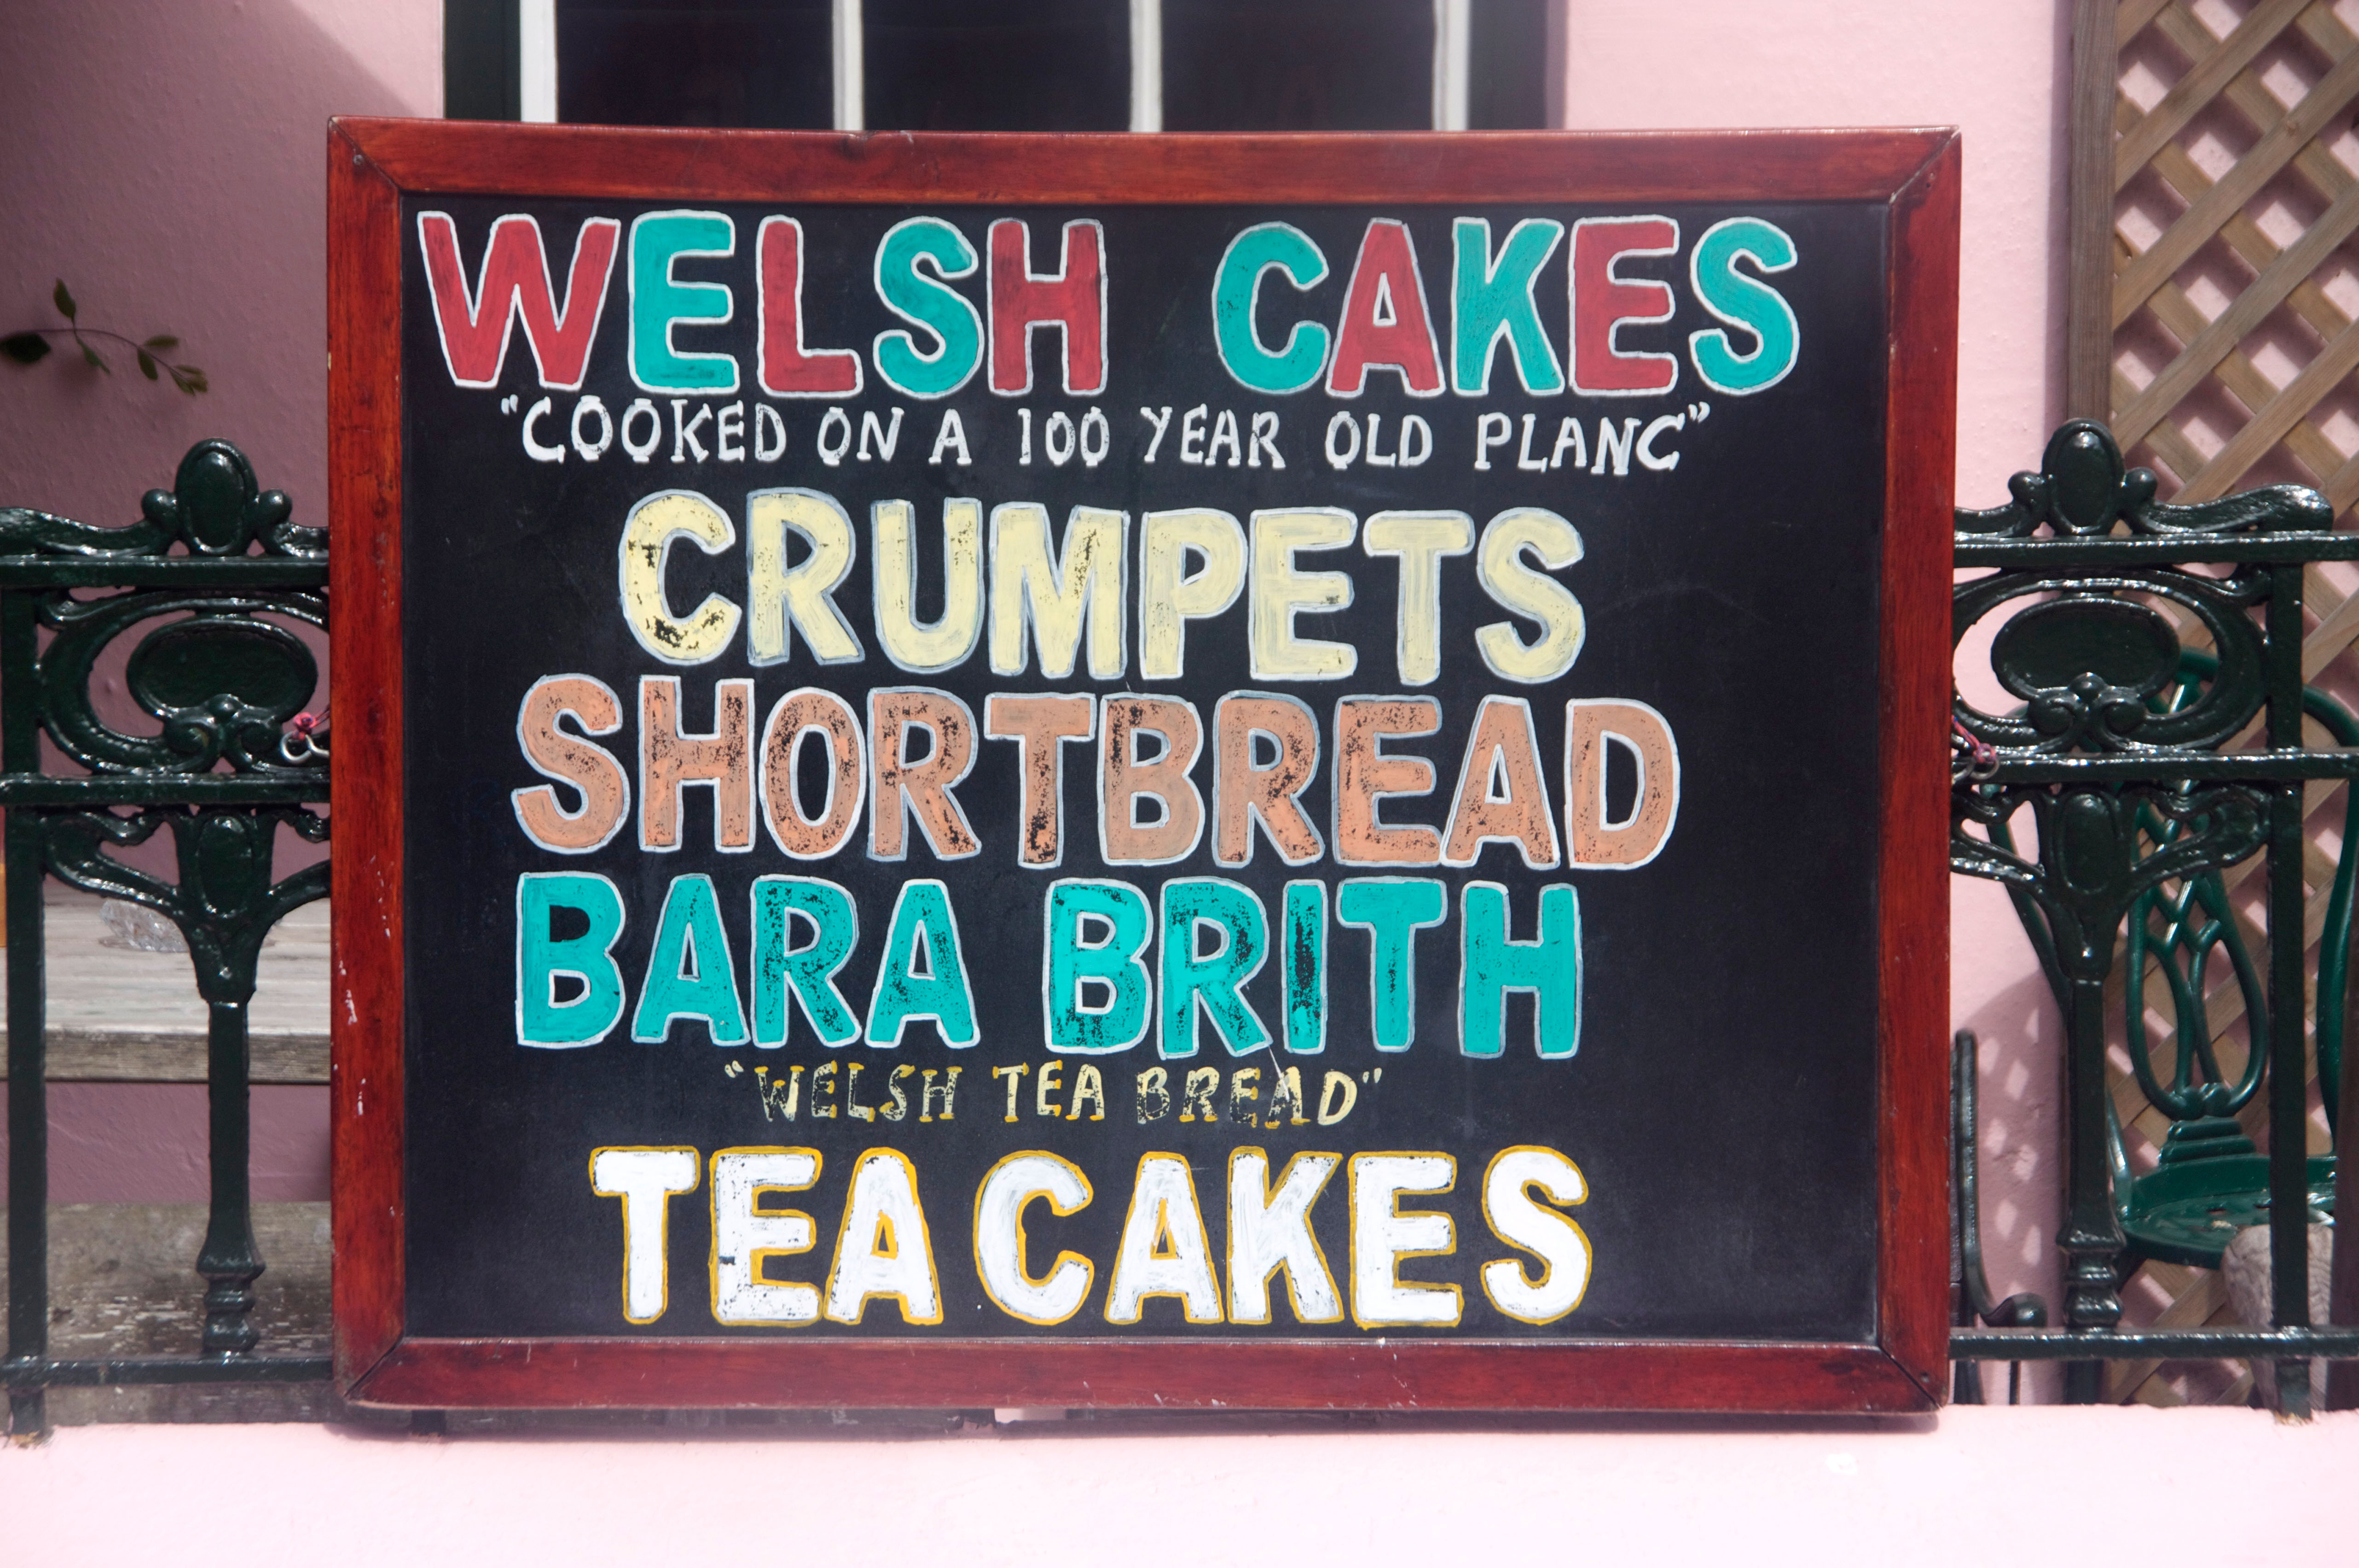 Welsh confectionery, like Welsh cakes, is made in the village